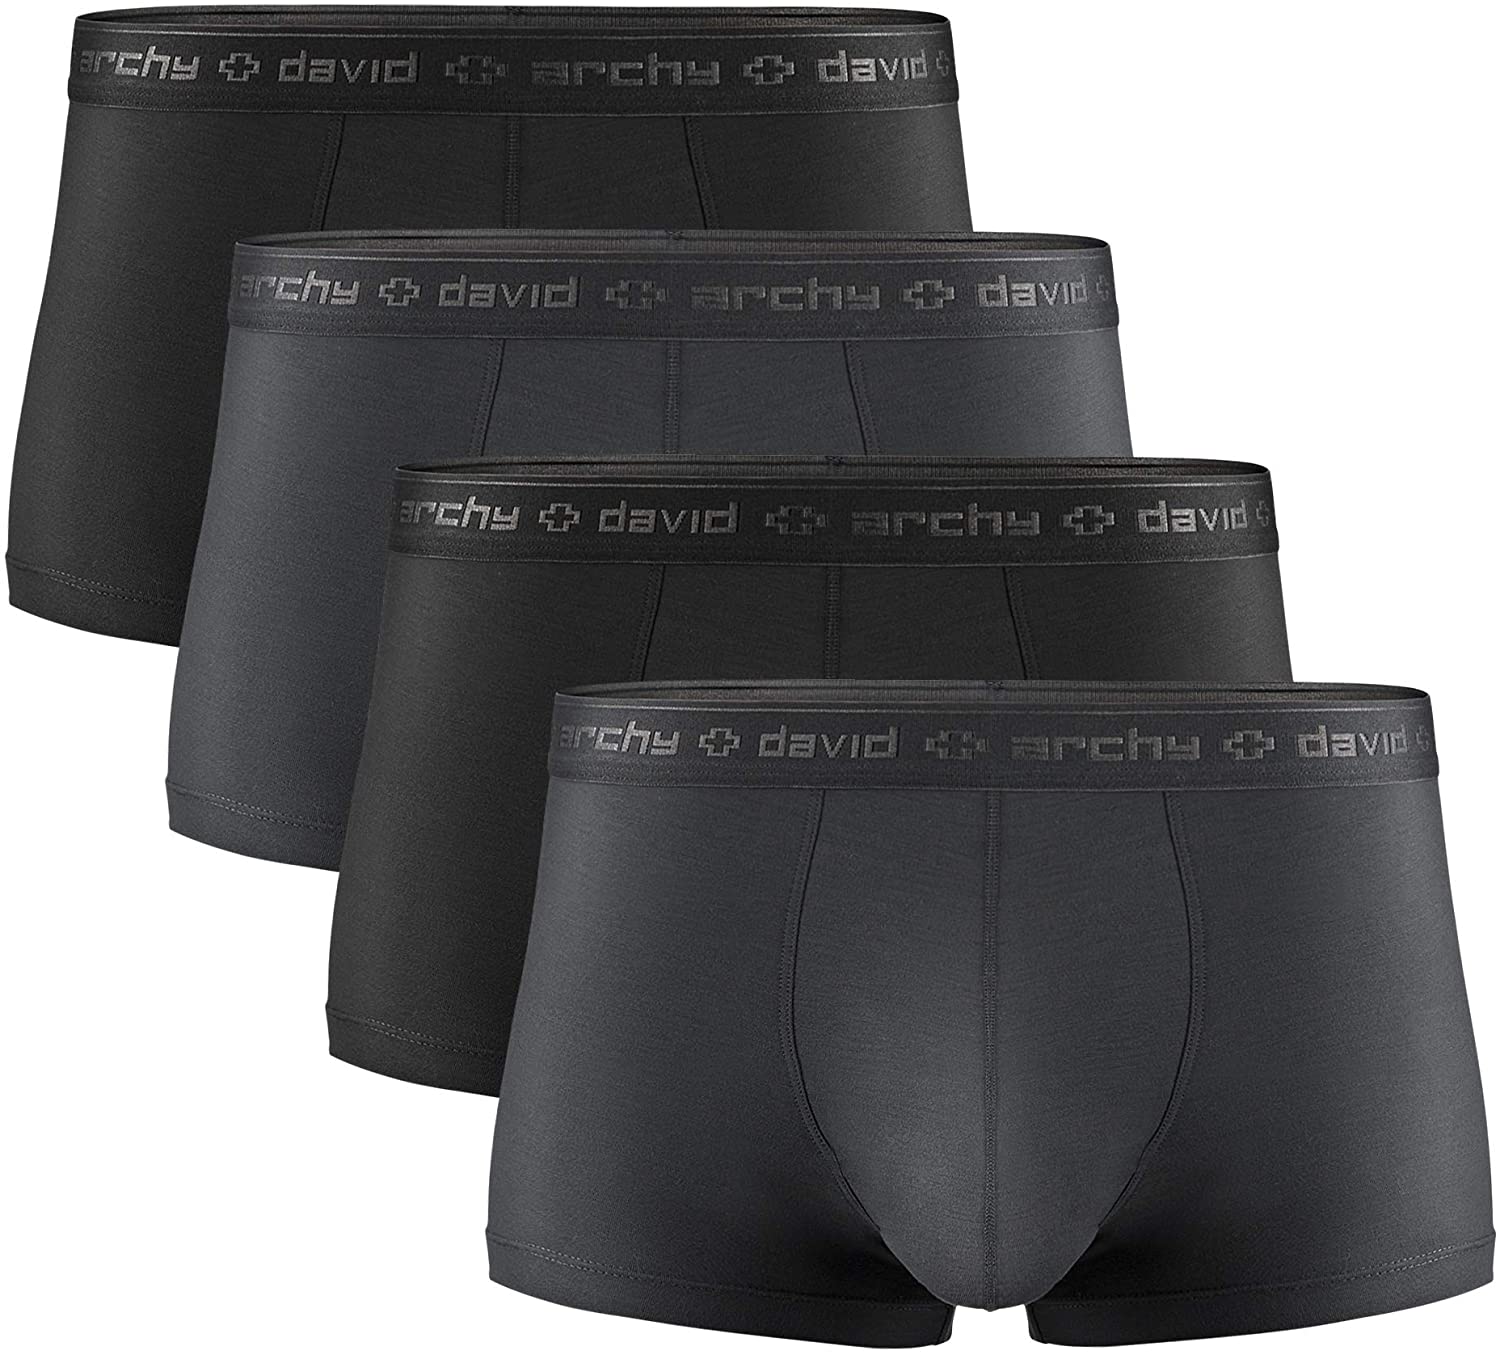 David Archy/Separatec Brand Sexy Mens 1 Pack Cotton Stretch